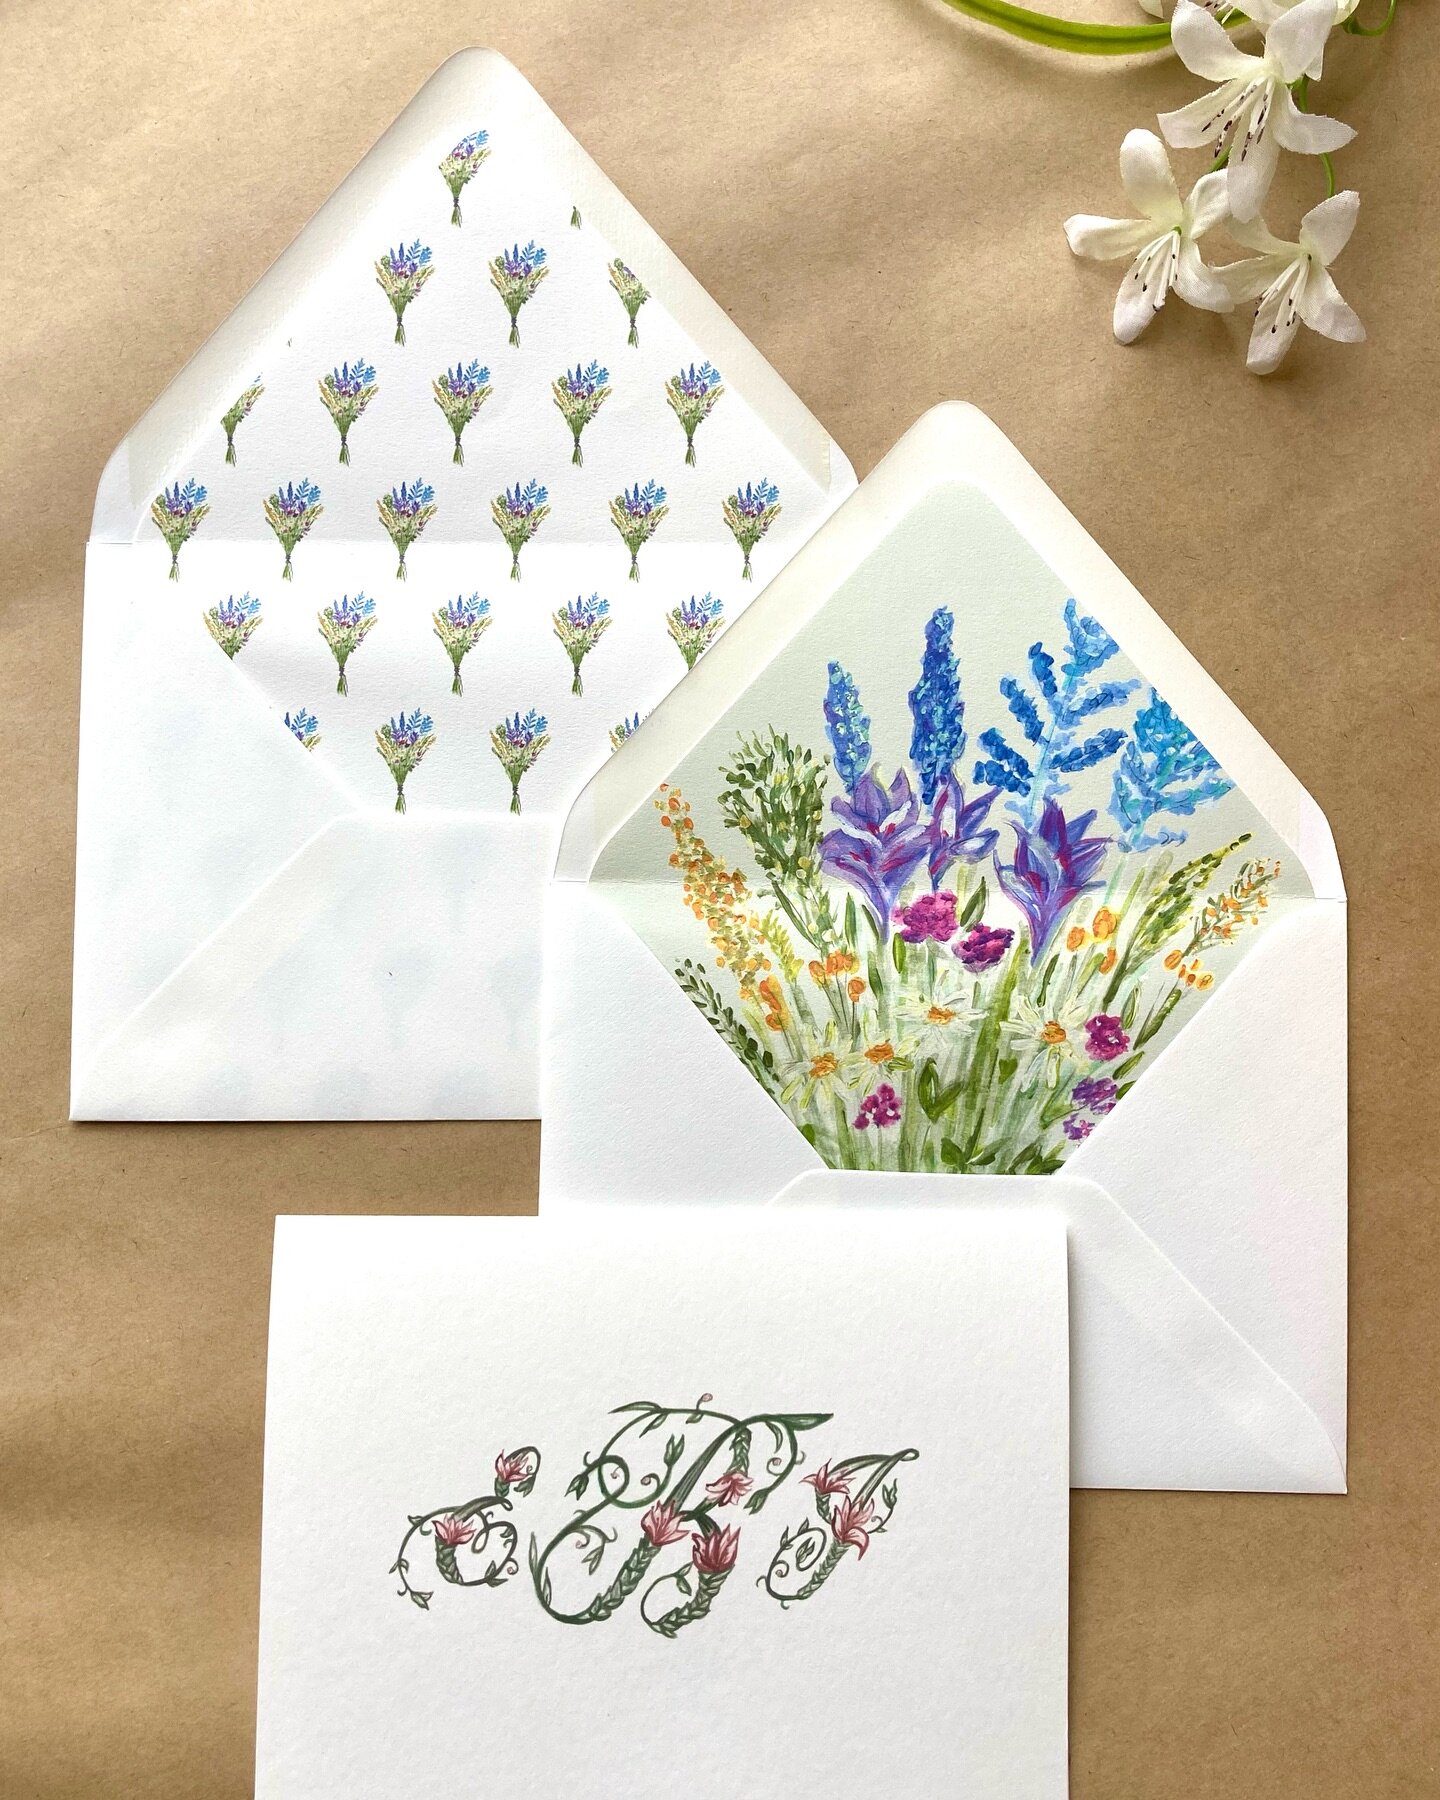 Little hints of spring are blooming, and color is back in the world again! Custom monogrammed stationery and lined envelopes calls for any and all spring colors to shine.

#custommonogram #customenvelopeliners #envelopeliner #customstationery #floral